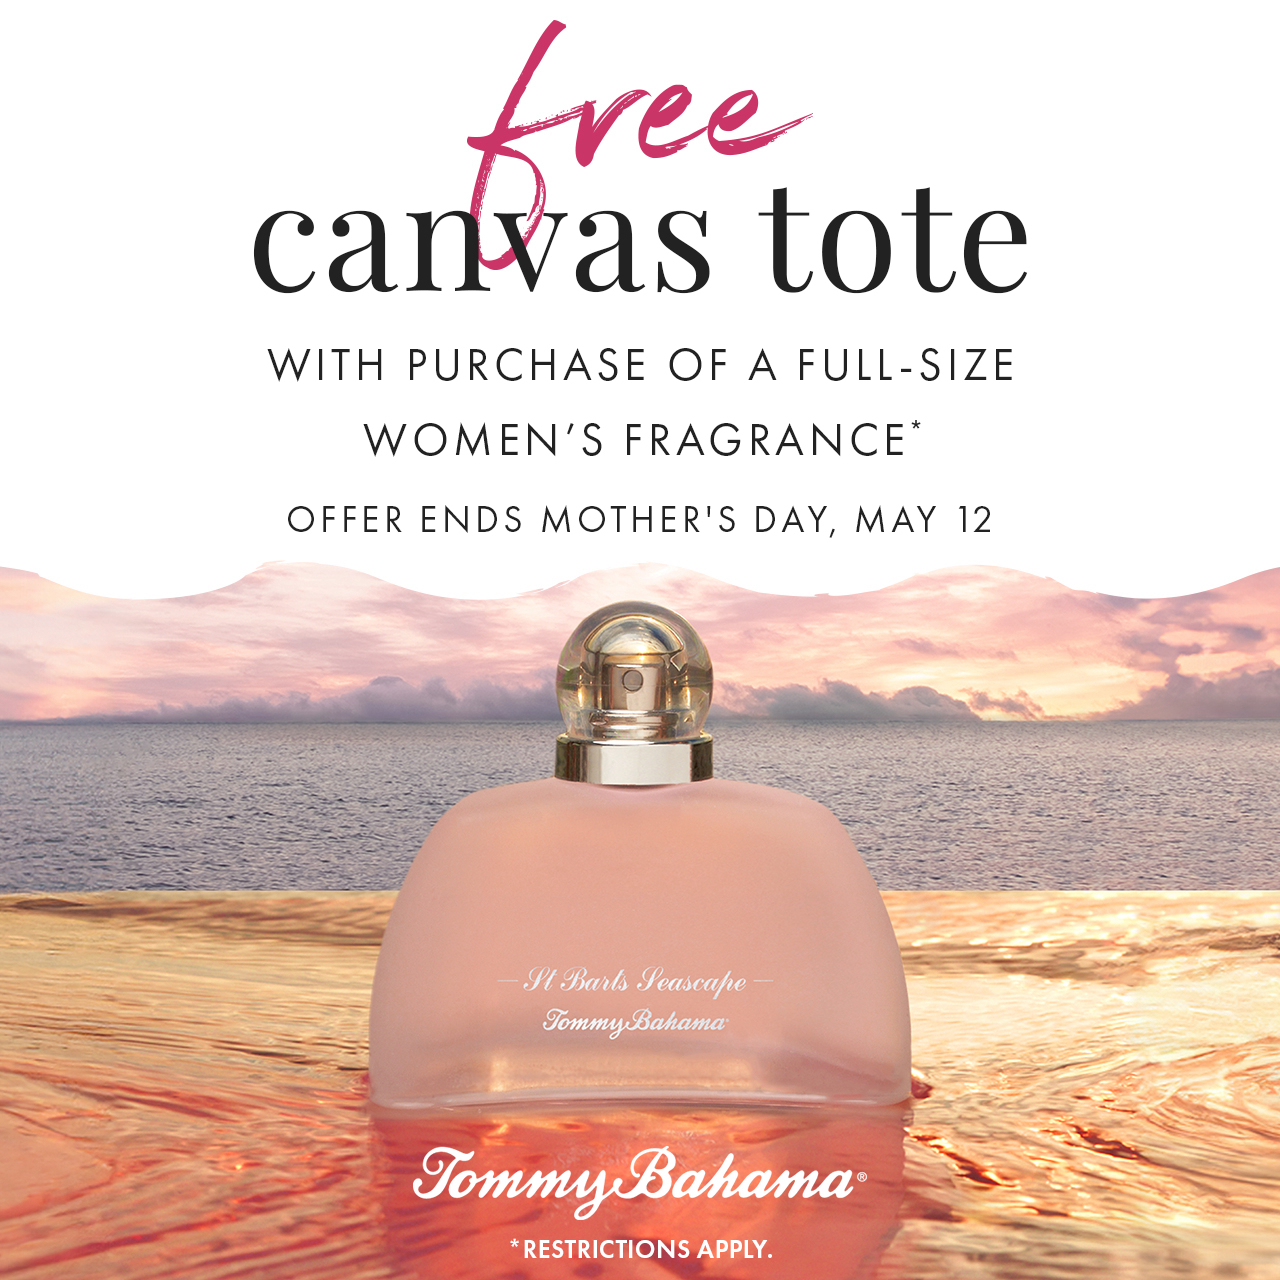 Tommy Bahama - Campaign 382 - Free Canvas Tote! - EN - 1280x1280